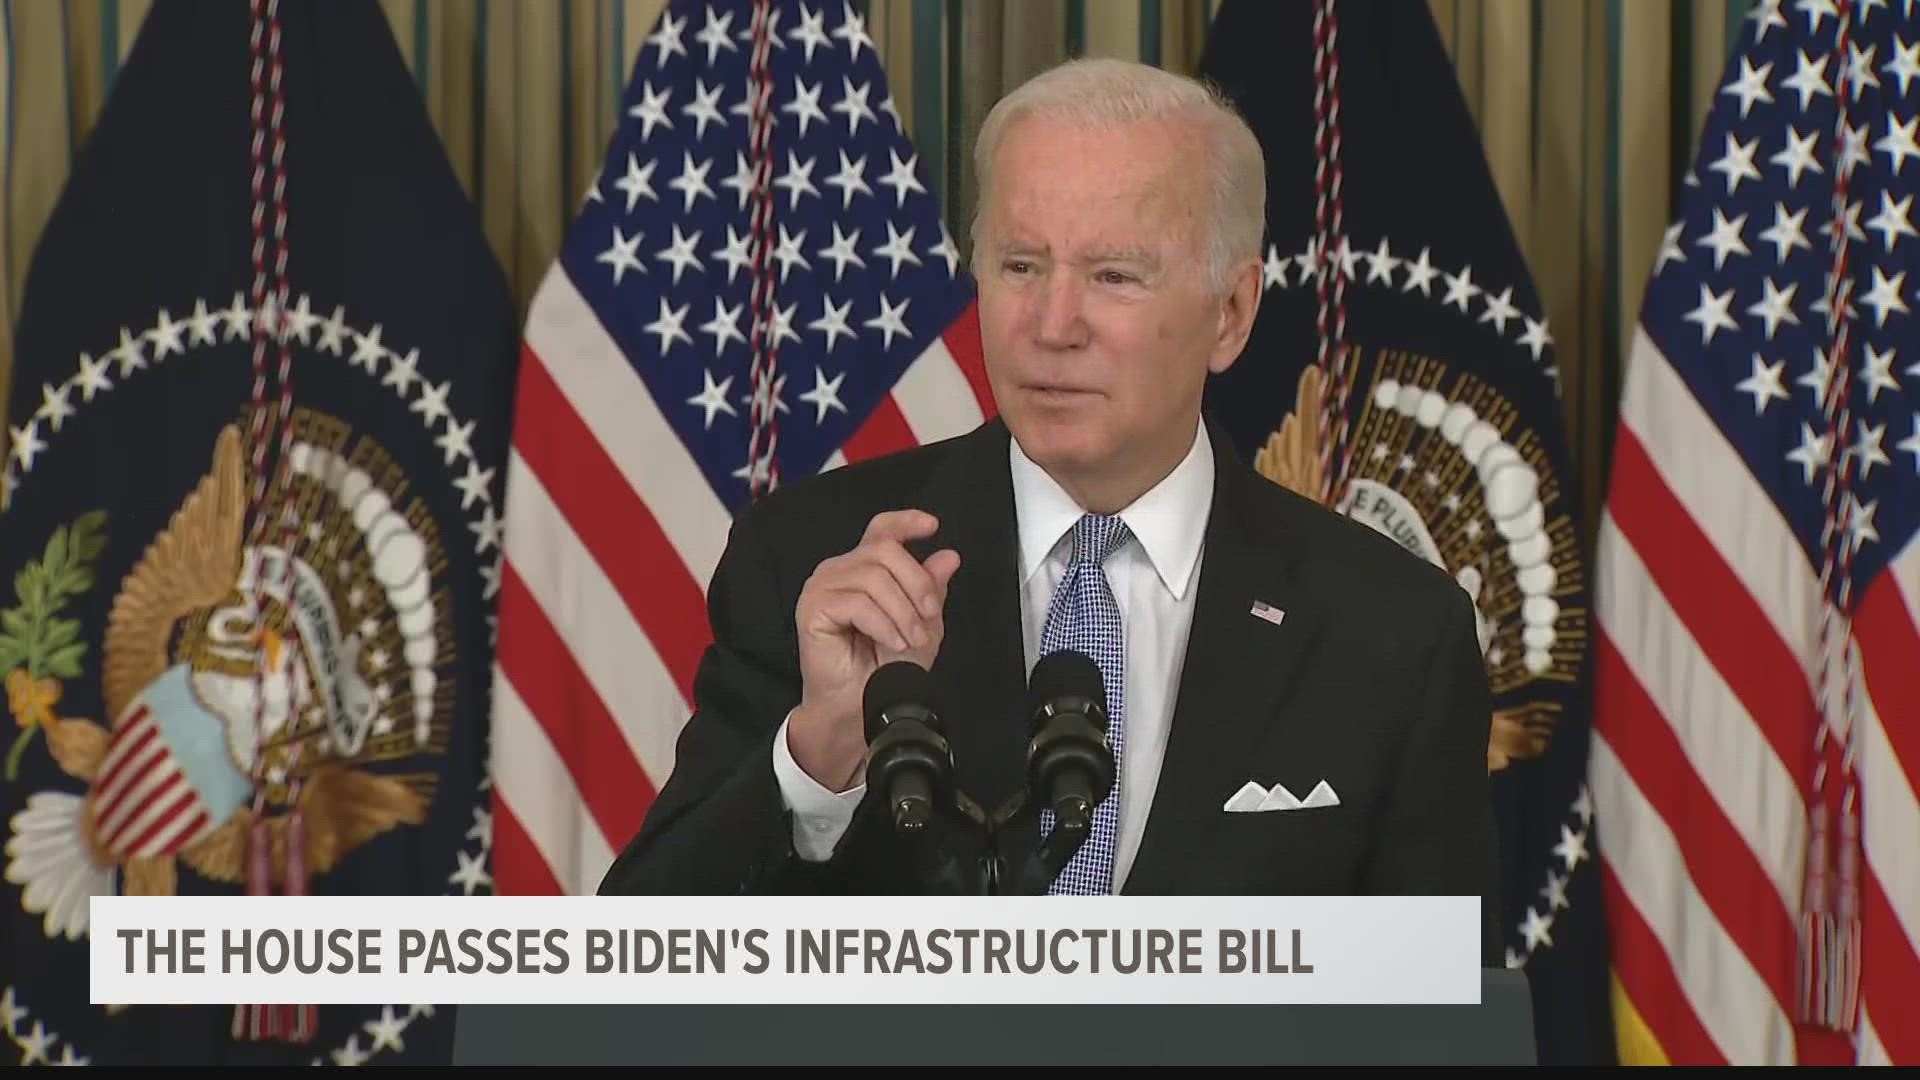 The bipartisan $1 trillion infrastructure bill is passed. As for the $1.85 trillion social spending package, its fate won't be known until later this month.